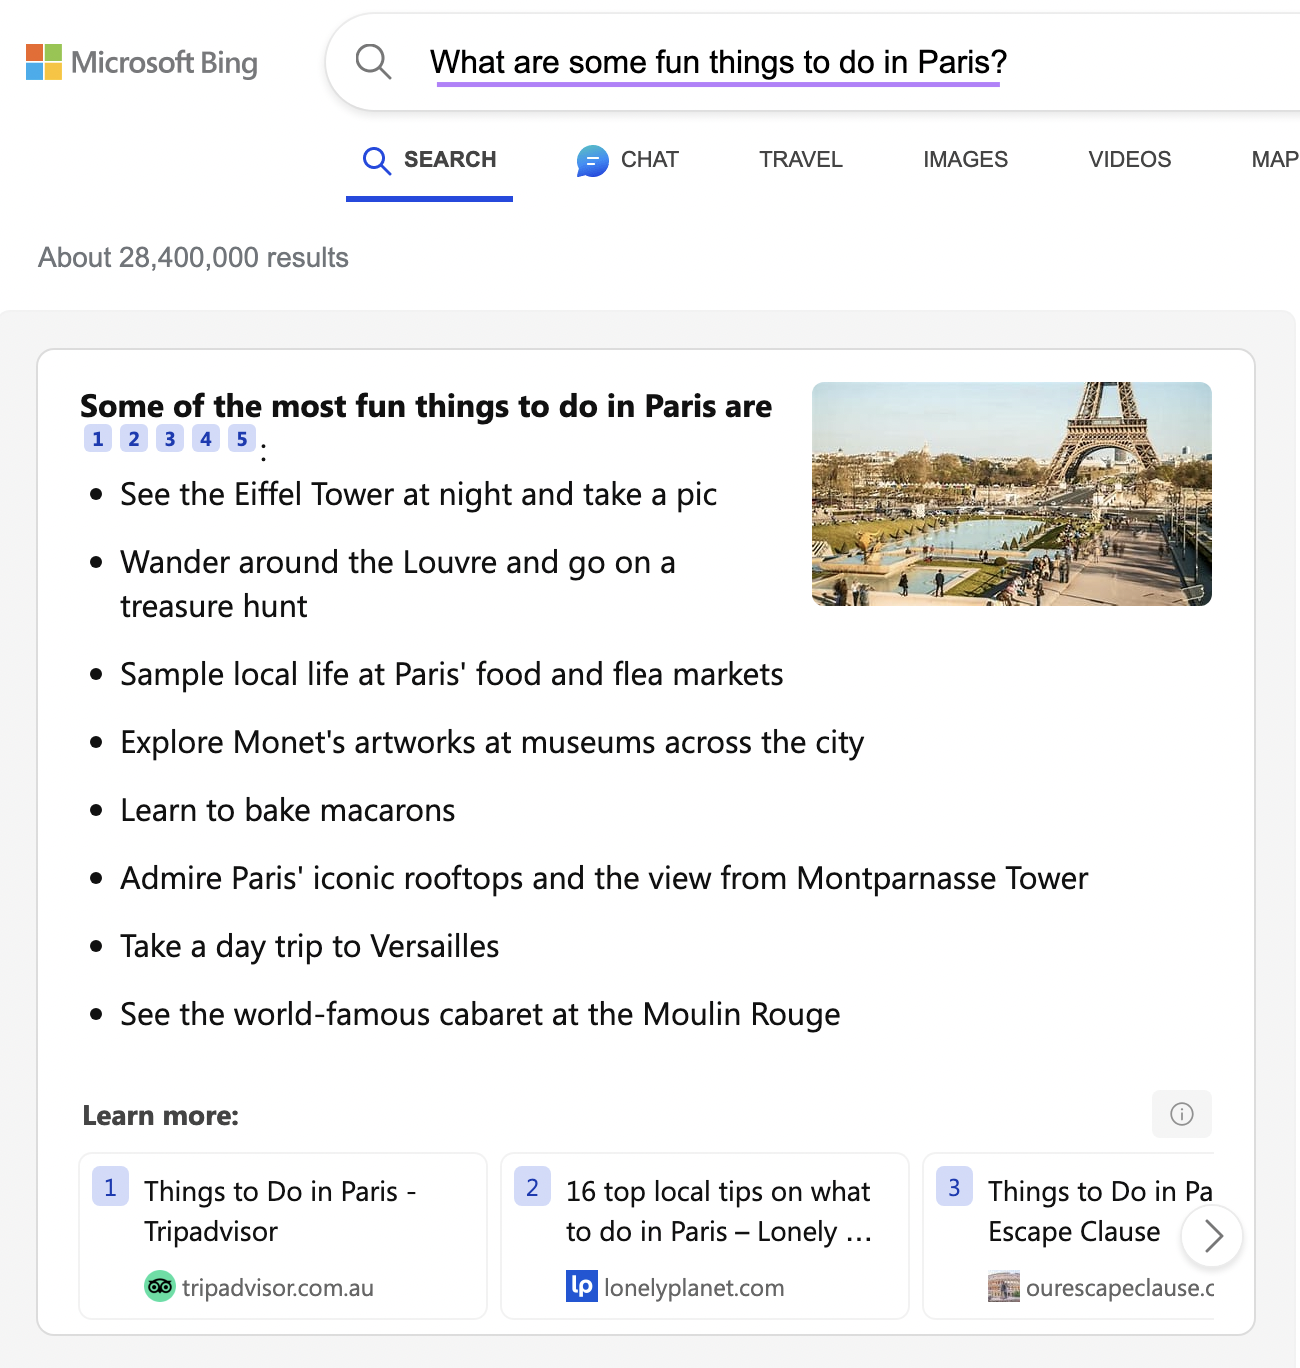 Bing's AI-generated summary for “What are some fun things to do in Paris?” query